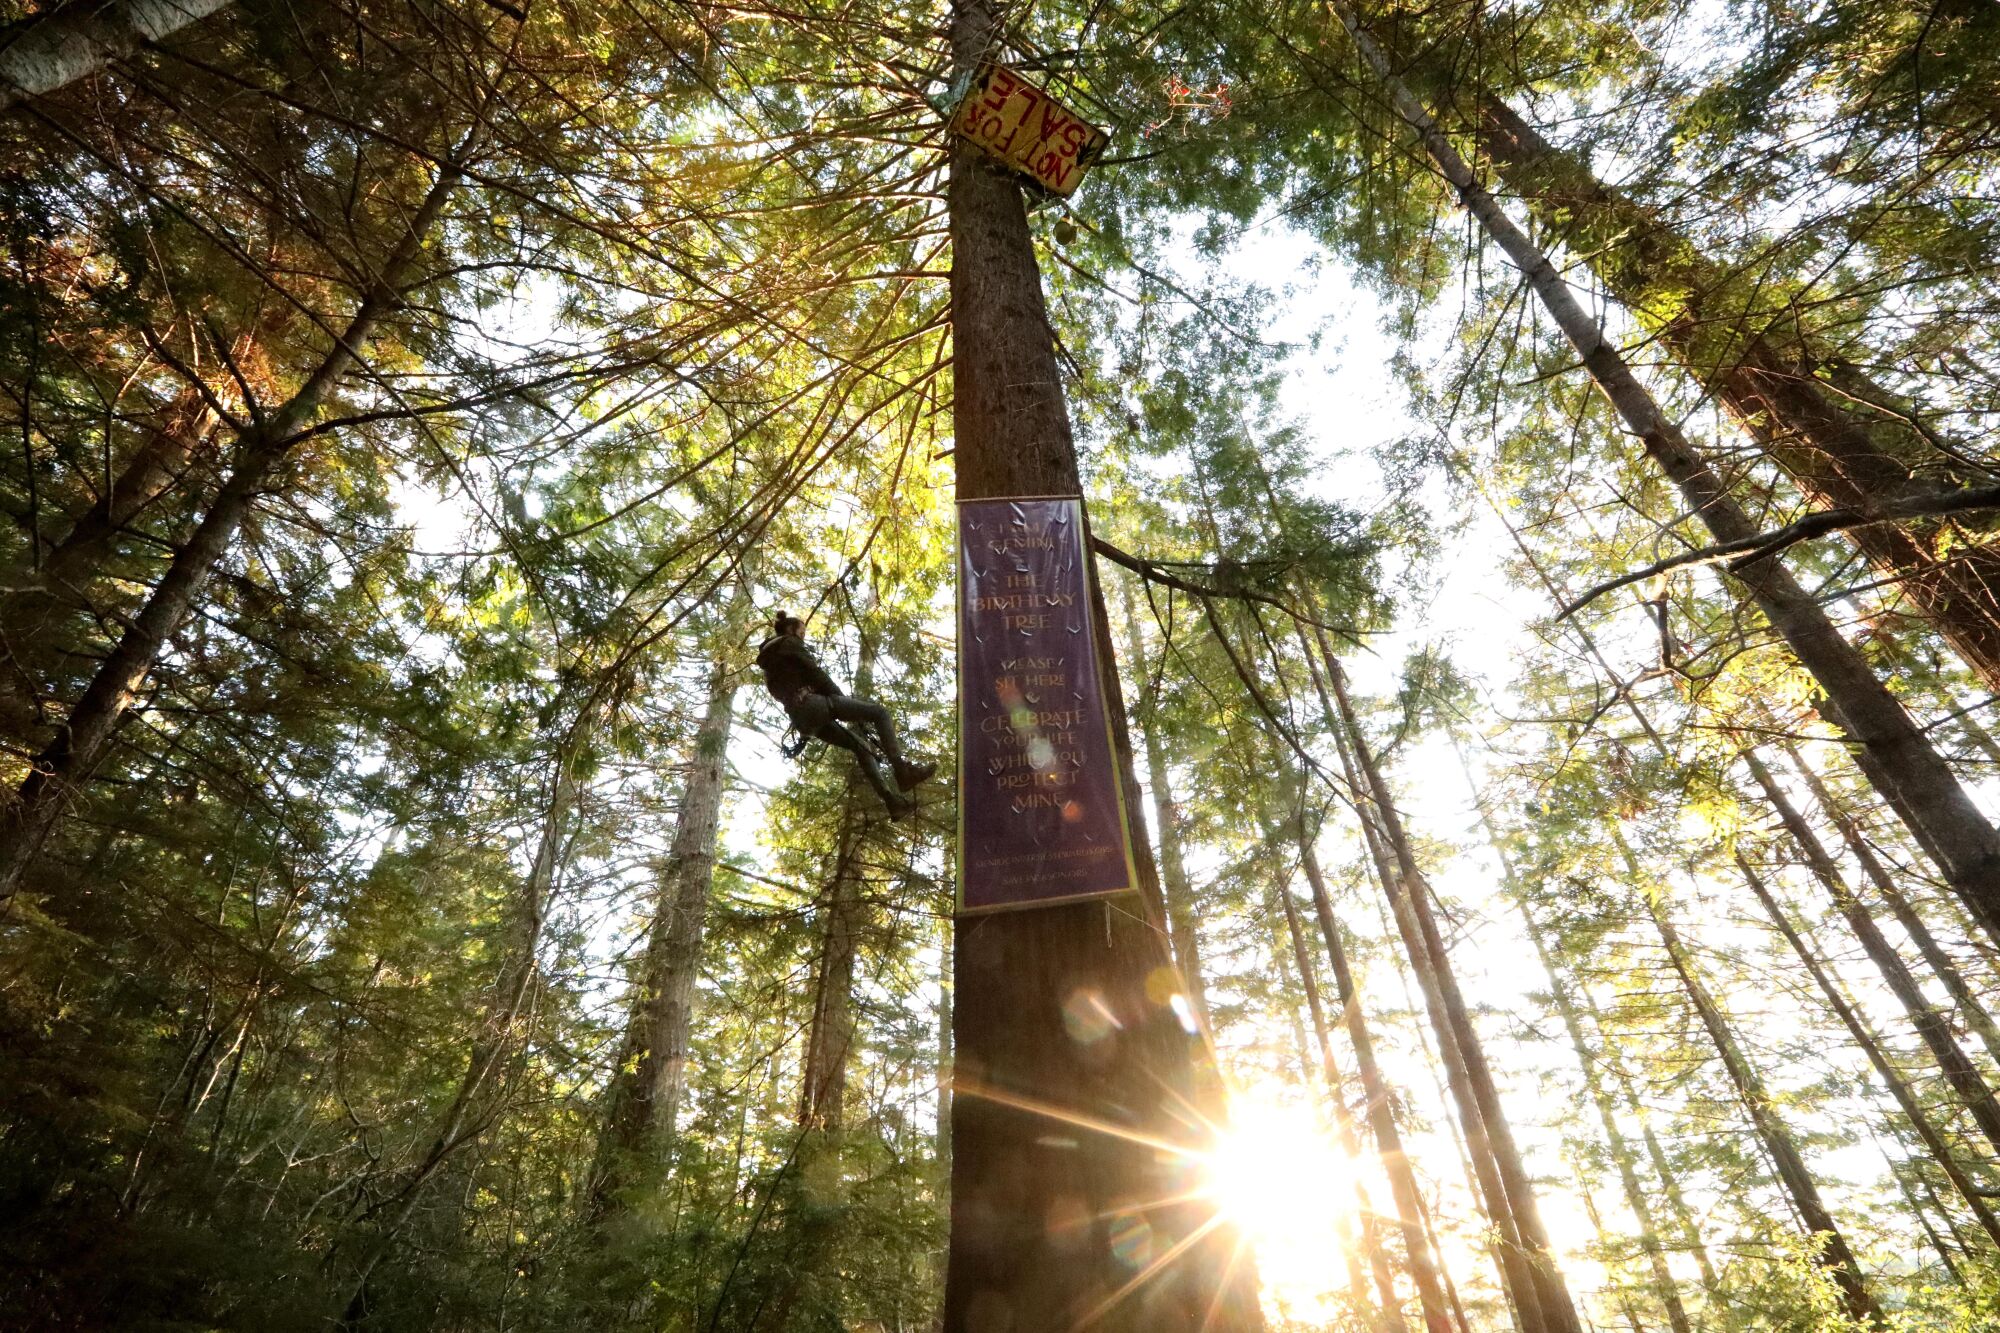 An activist ascends a redwood tree named Gemini in the Jackson Demonstration State Forest.